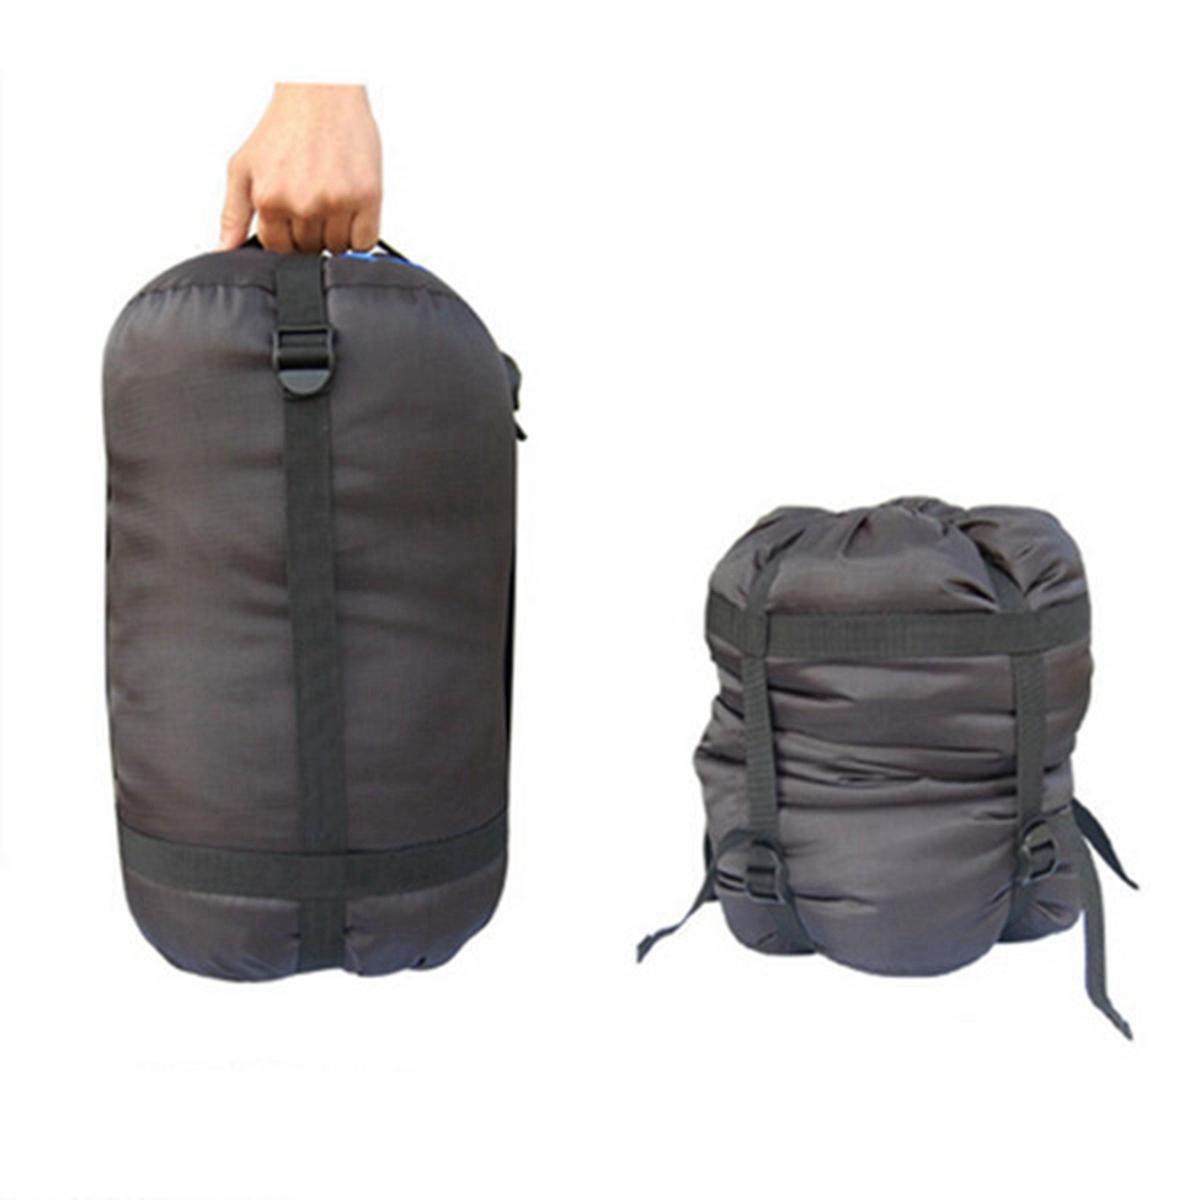 Light Weight Outdooors Camping Sleeping Compression Stuff Sack Bag